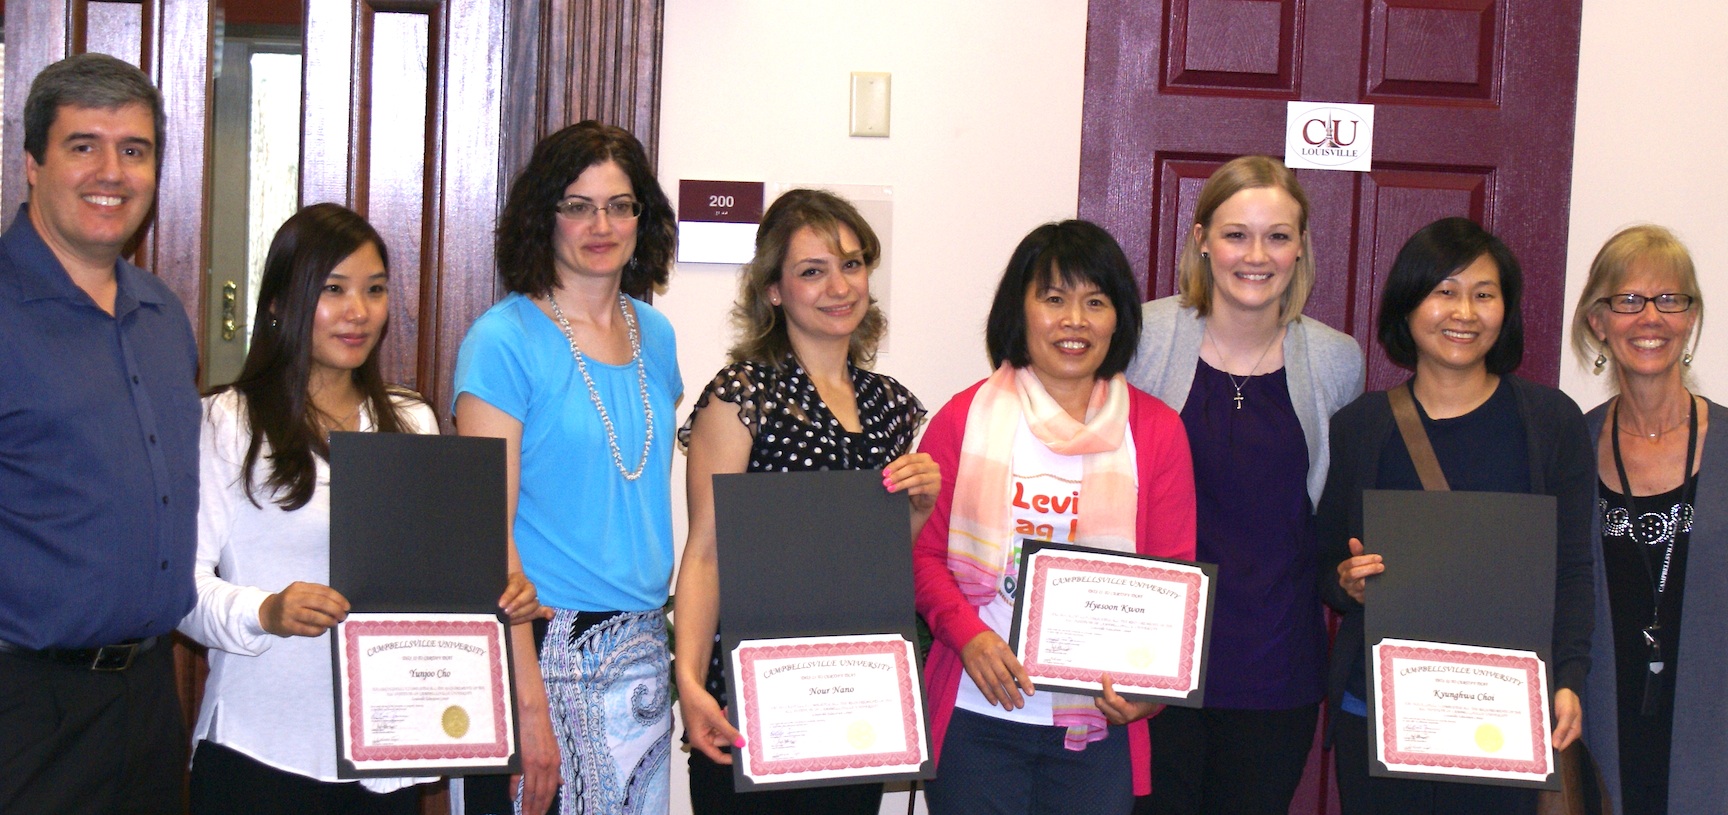 English as a Second Language (ESL) students at Campbellsville University's Louisville Education Center received their certificates of completion April 30. From left are: instructor Eduardo Trindade, Yunjoo Cho, assistant director of ESL, Ardeen Top, student Nour Nano, student Hyesoon Kwon, CU alumna and former adjunct ESL teacher Ashley Boyd, Kyunghwa Choi and instructor Joy Hagan. For more information about the ESL program in Louisville, call (502) 753-0264. (Campbellsville University photo provided by the Louisville Education Center)